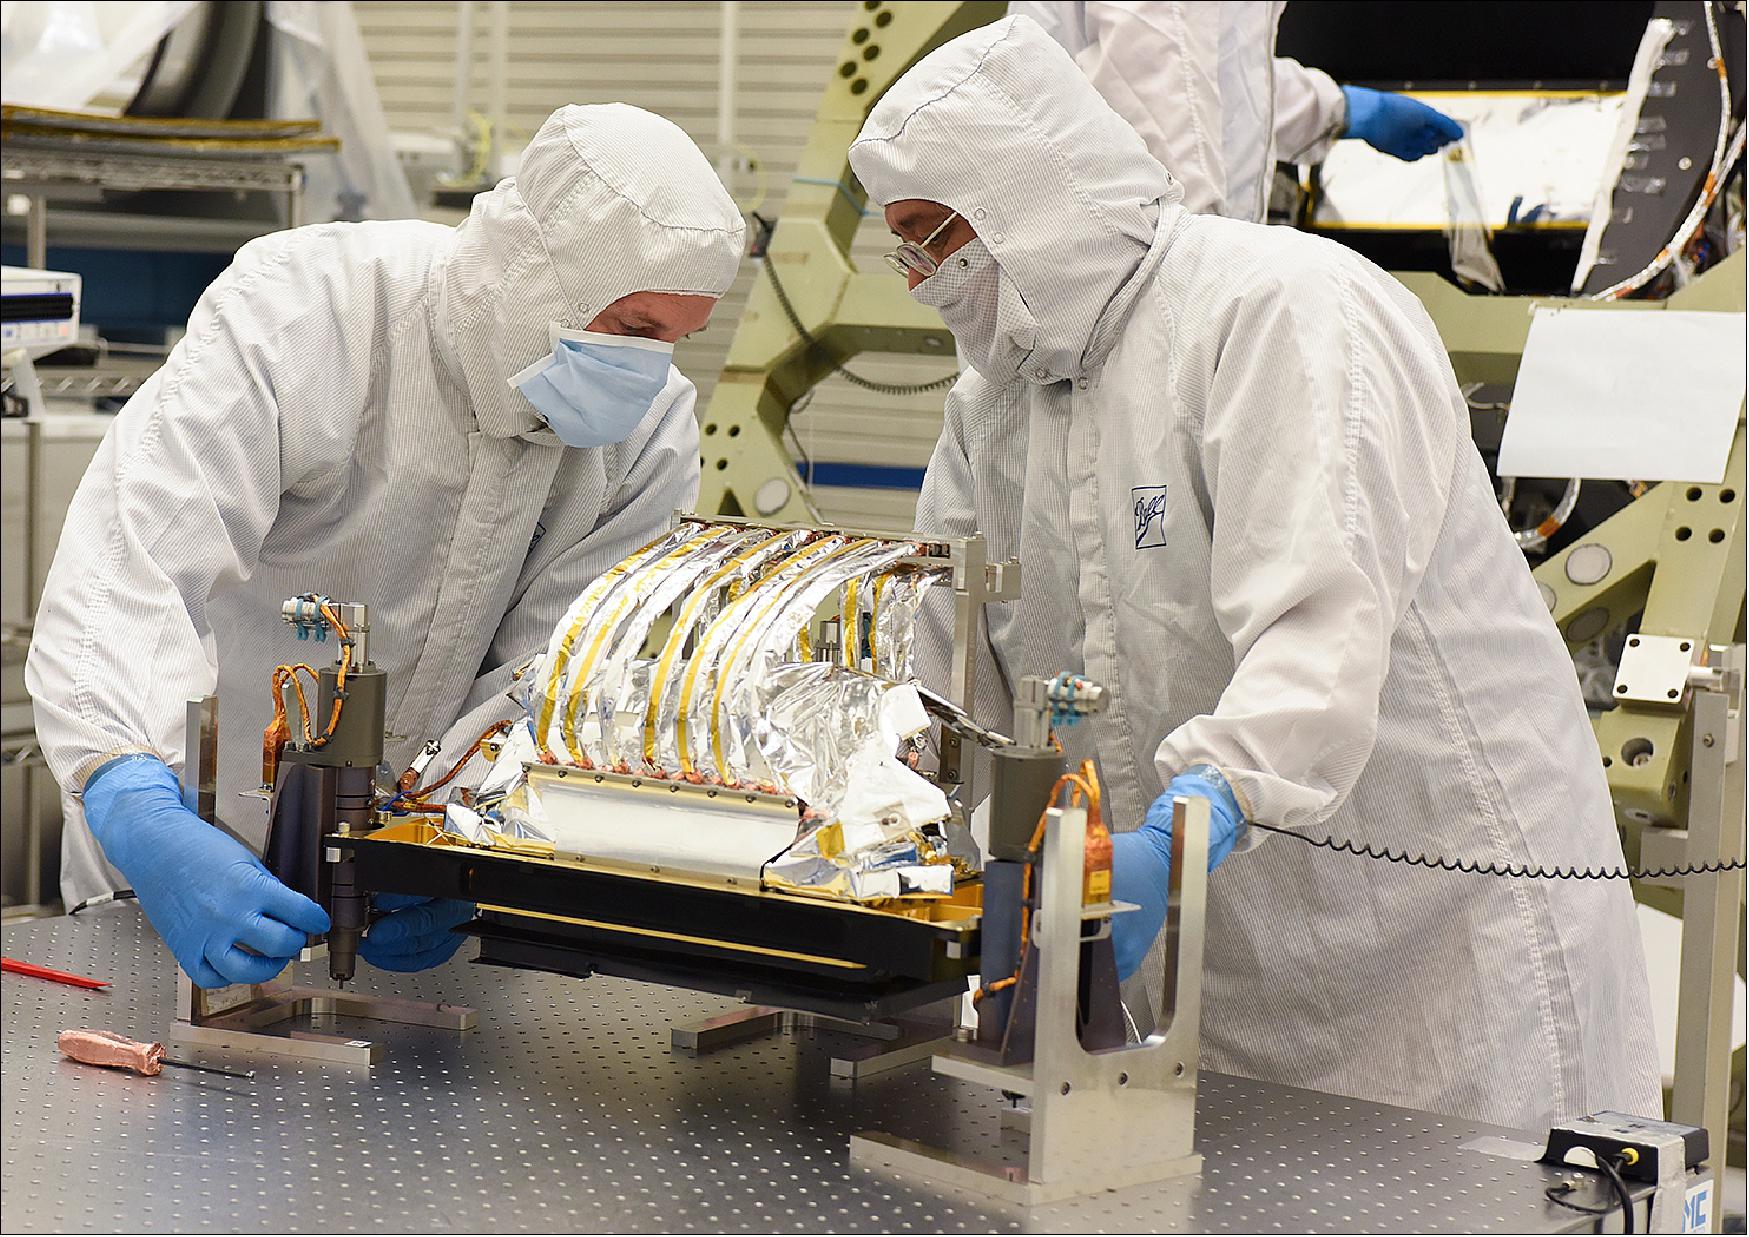 Figure 10: Ball Aerospace technicians prepare to install the focal plane assembly, a 14-module detector array, into the OLI-2 (Operational Land Imager 2), one of the key science instruments for Landsat-9 (image credit: Ball Aerospace)